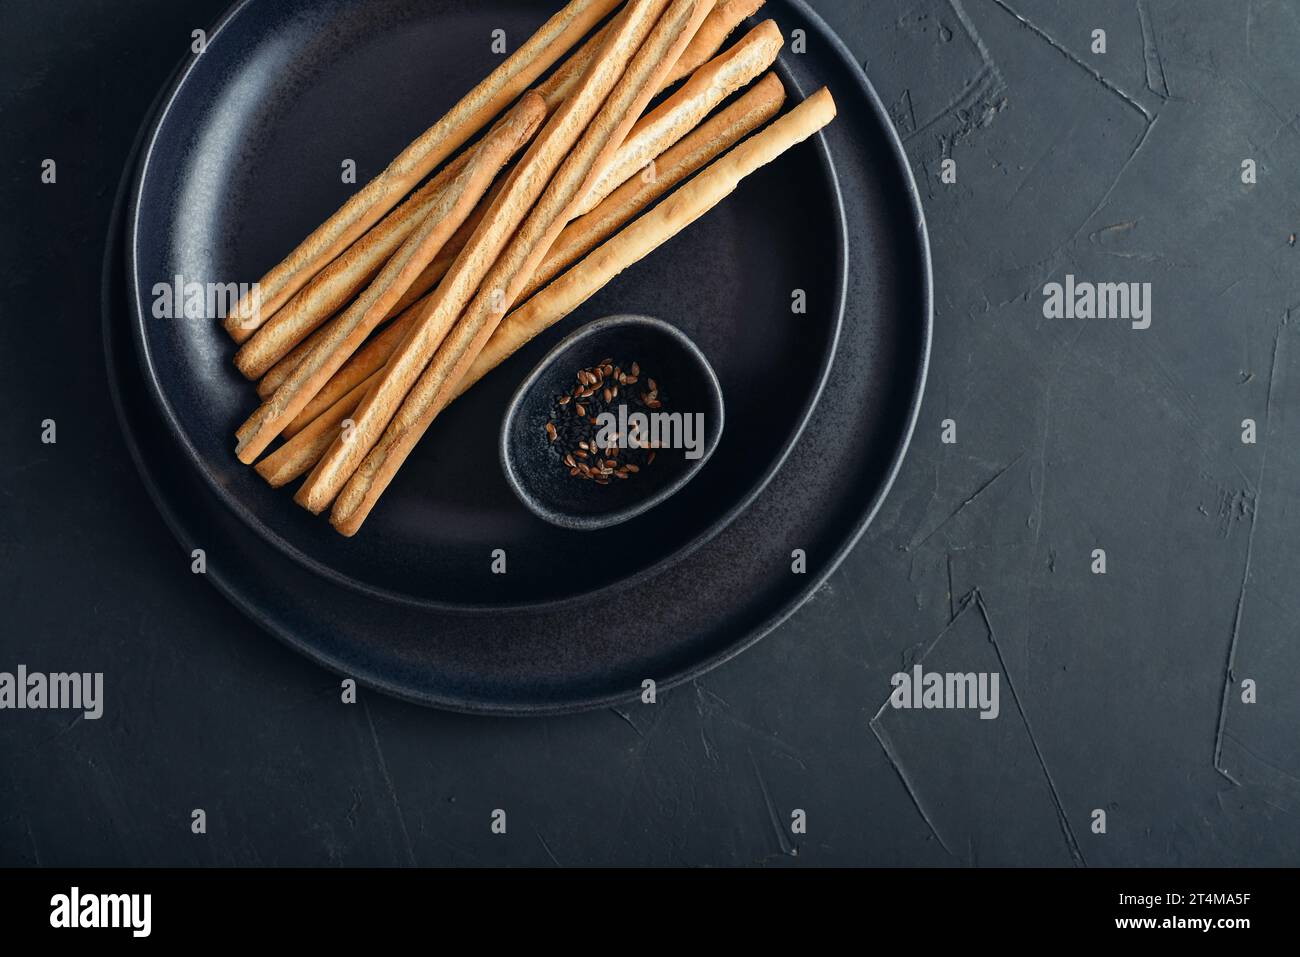 Fresh baked Italian grissini breadsticks on plate with sesame and flax seeds on black background, top view Stock Photo